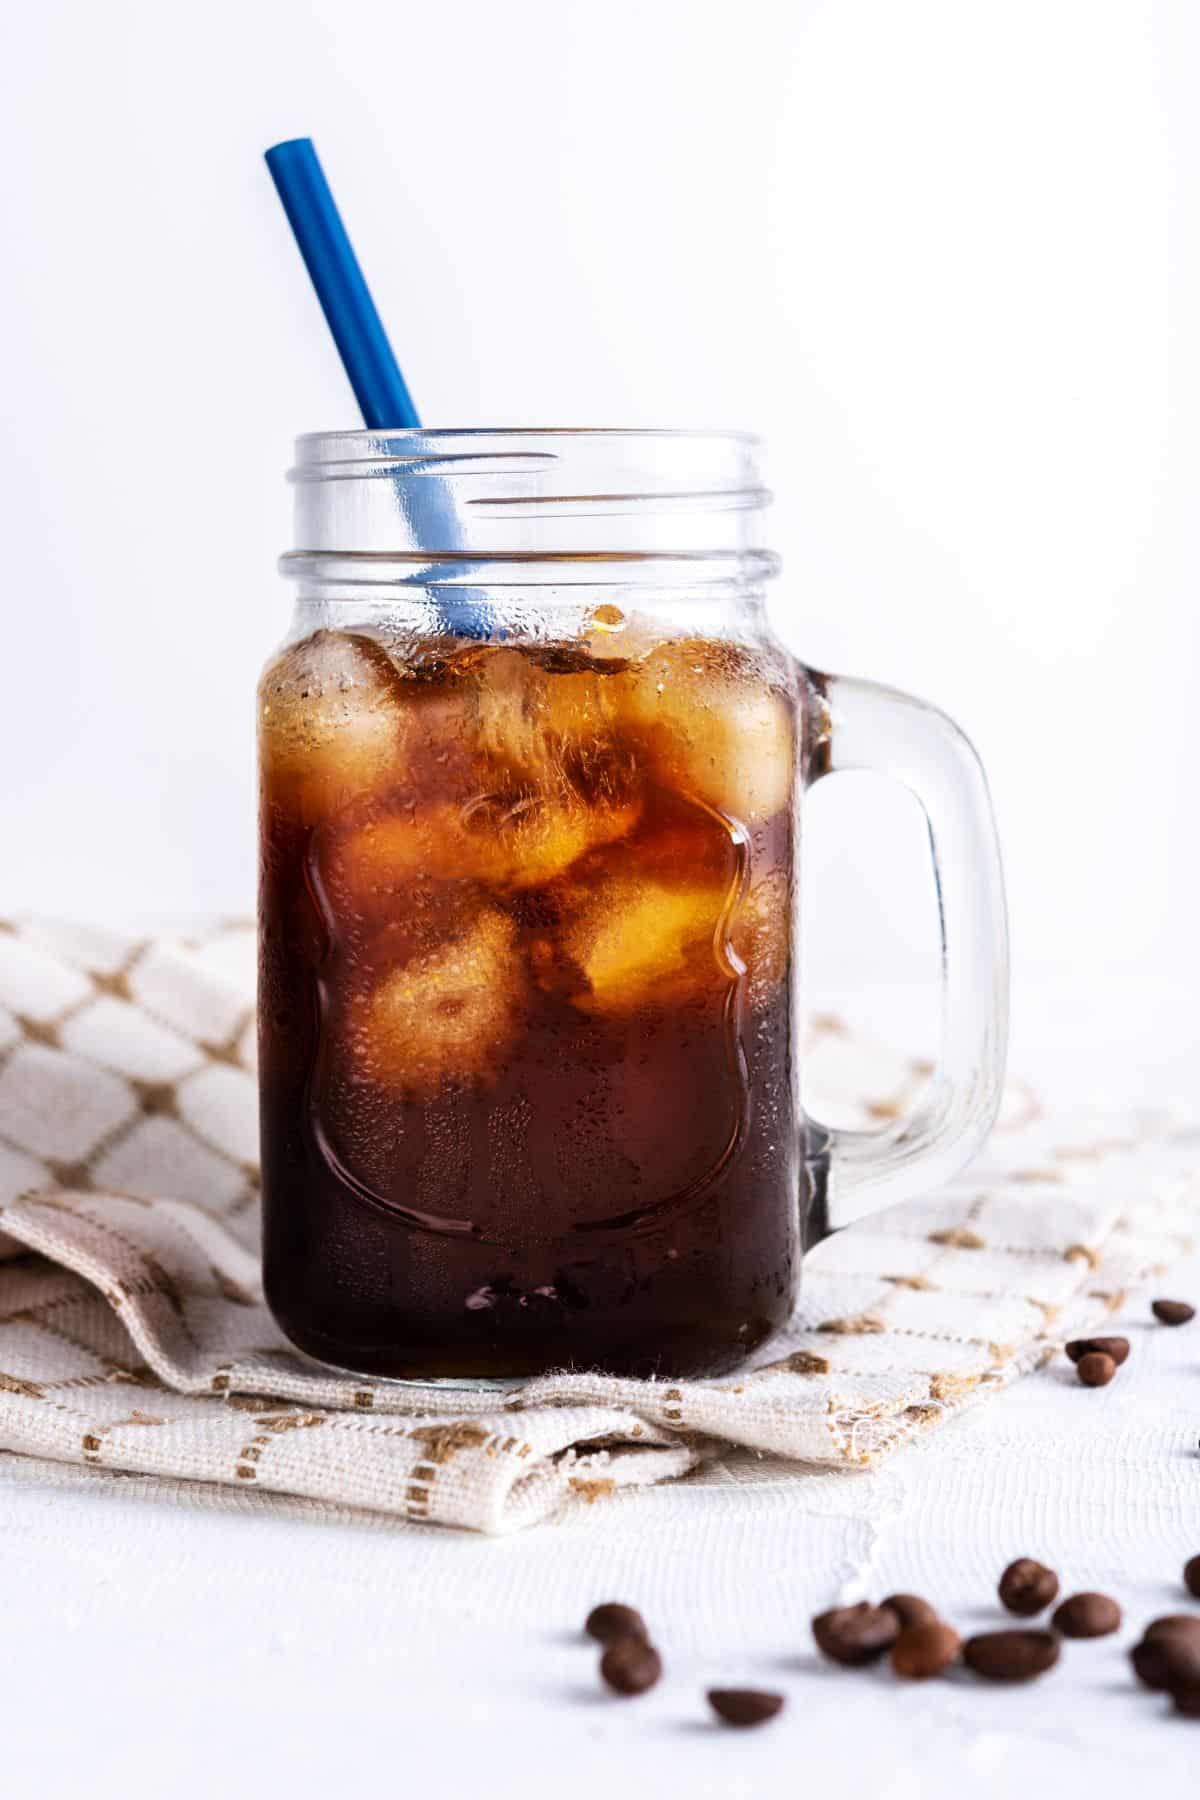 a glass of cold-brew coffee with a blue straw.